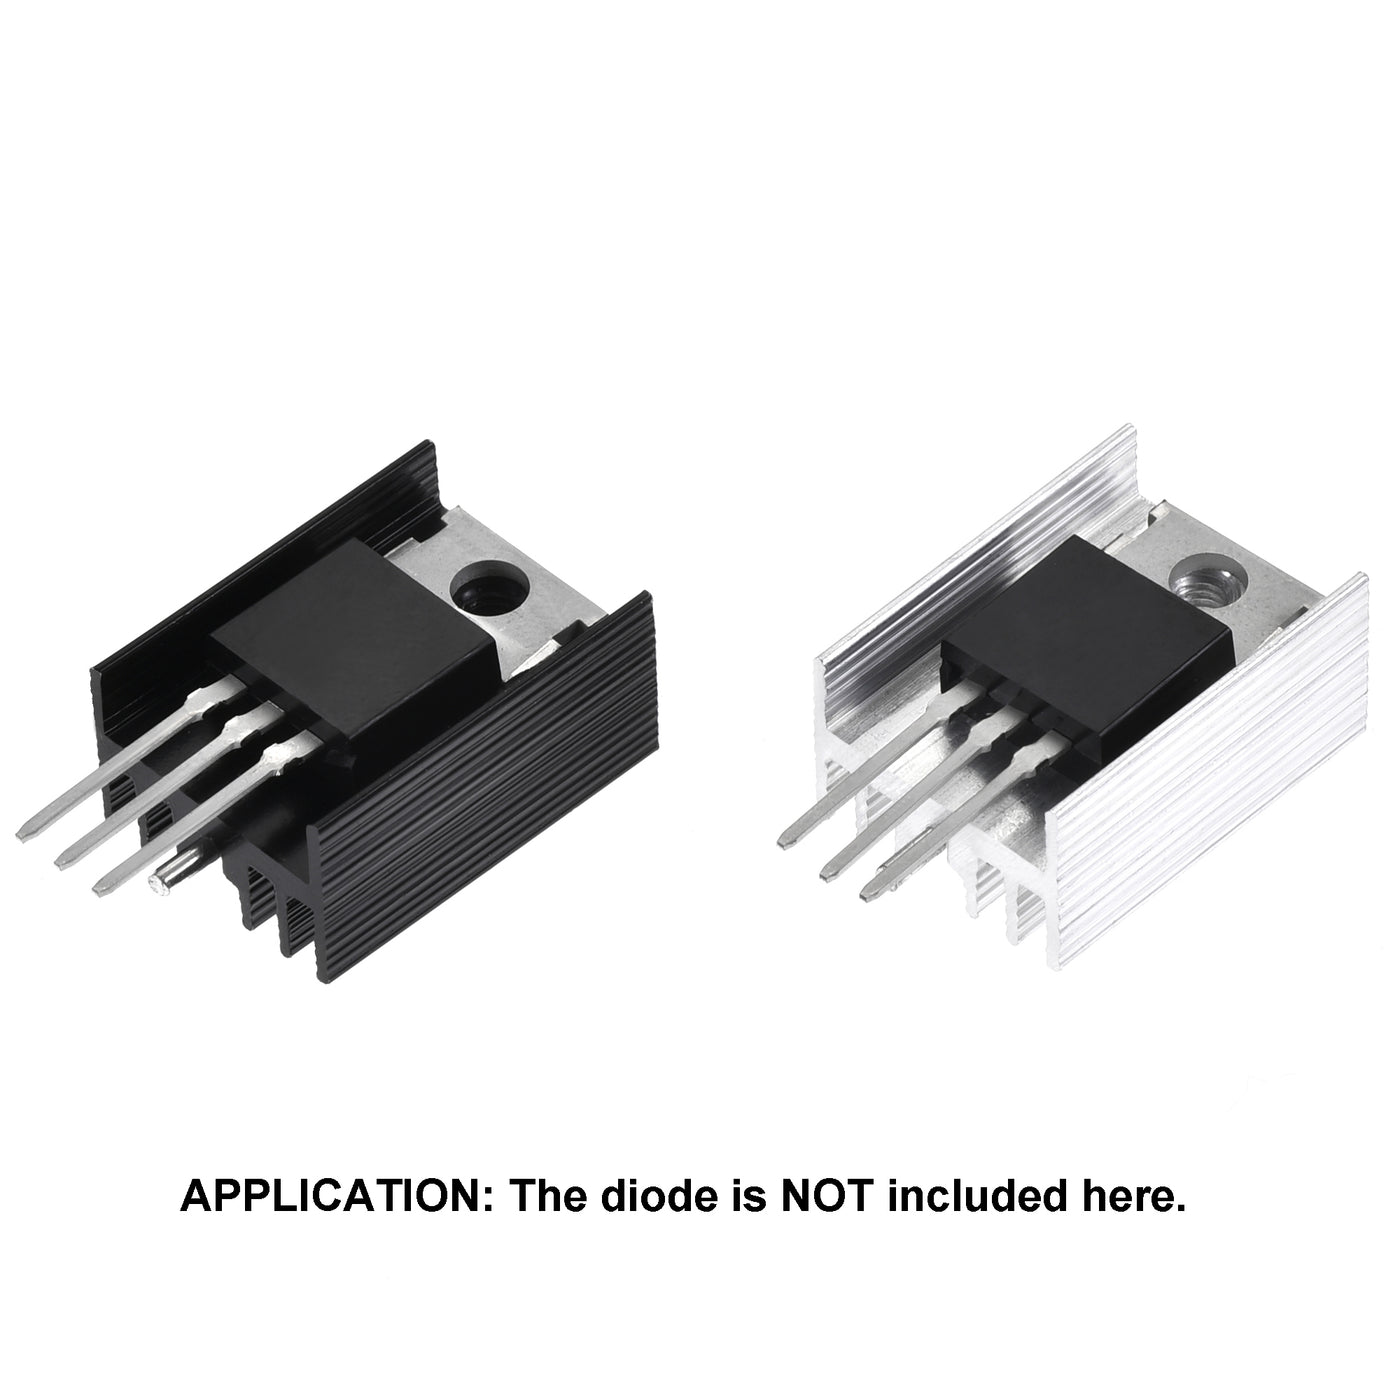 uxcell Uxcell 21x15x11mm TO-220 Aluminum Heatsink Kit for Cooling Transistor Diodes with a Support Pin